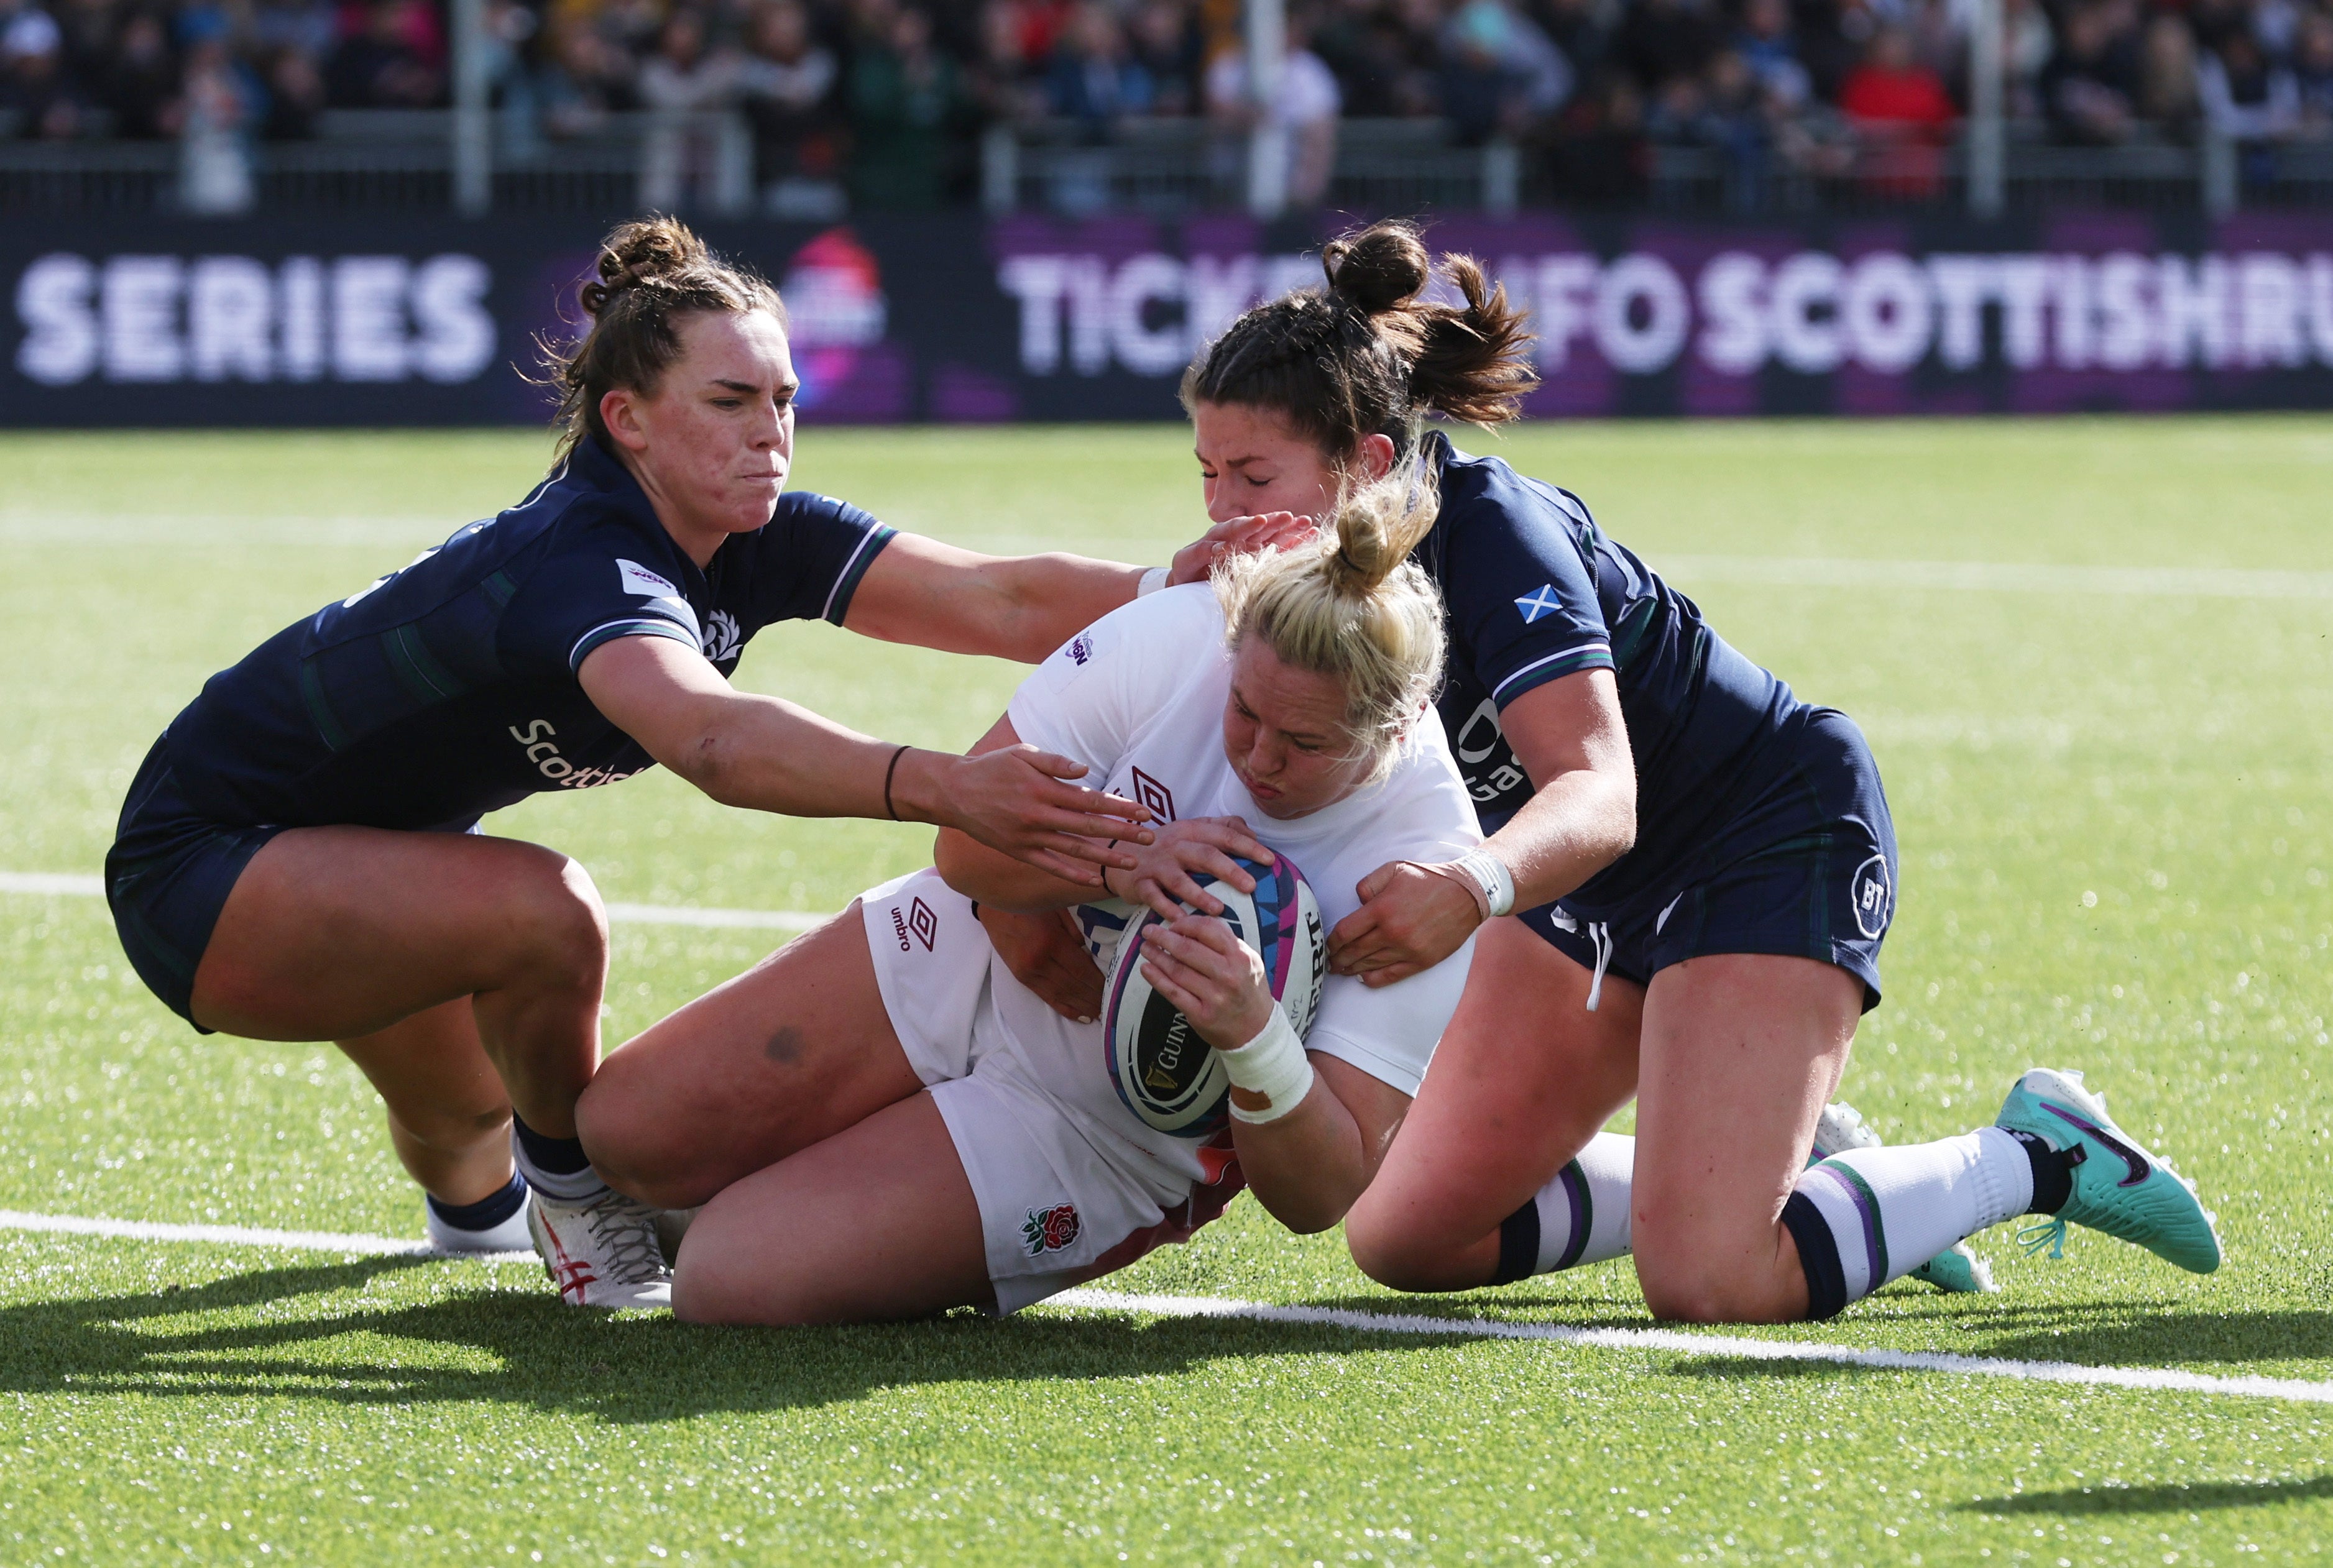 Marlie Packer came off the bench to score England’s eighth try